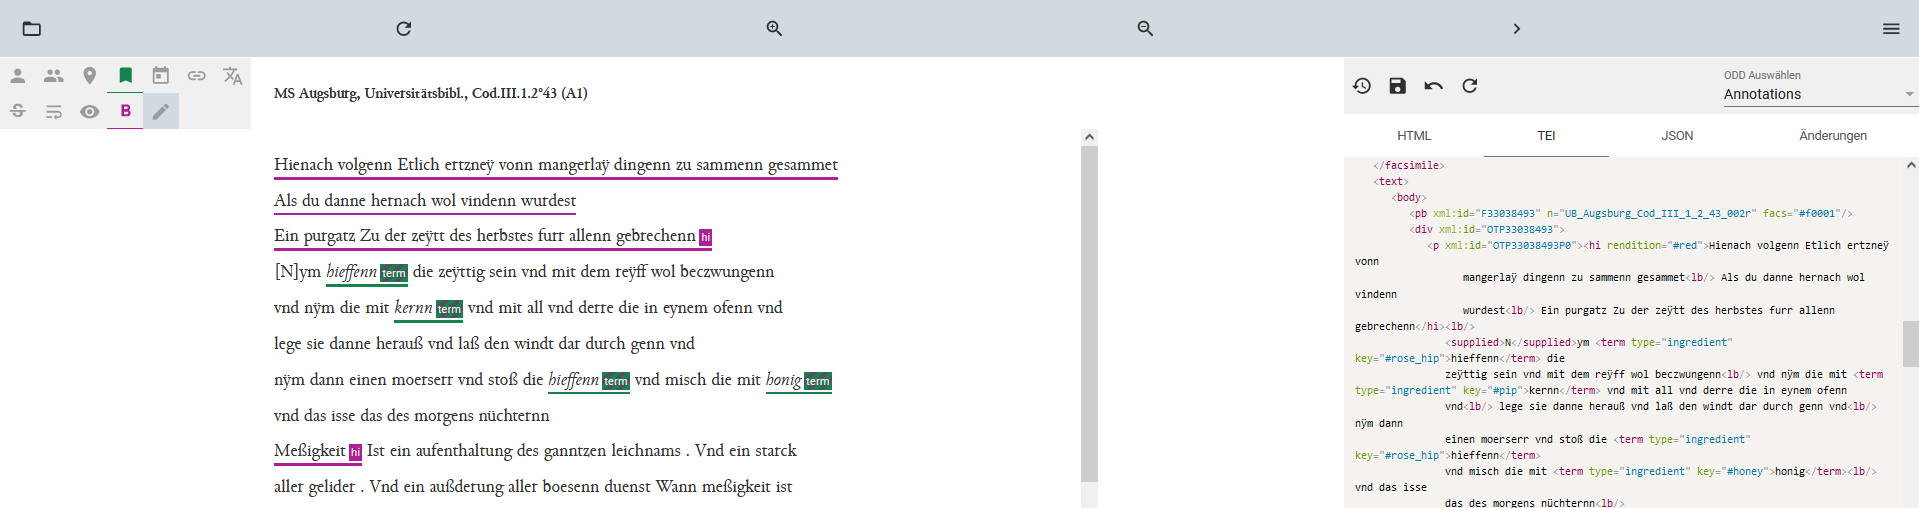 Annotationseditor im TEI Publisher